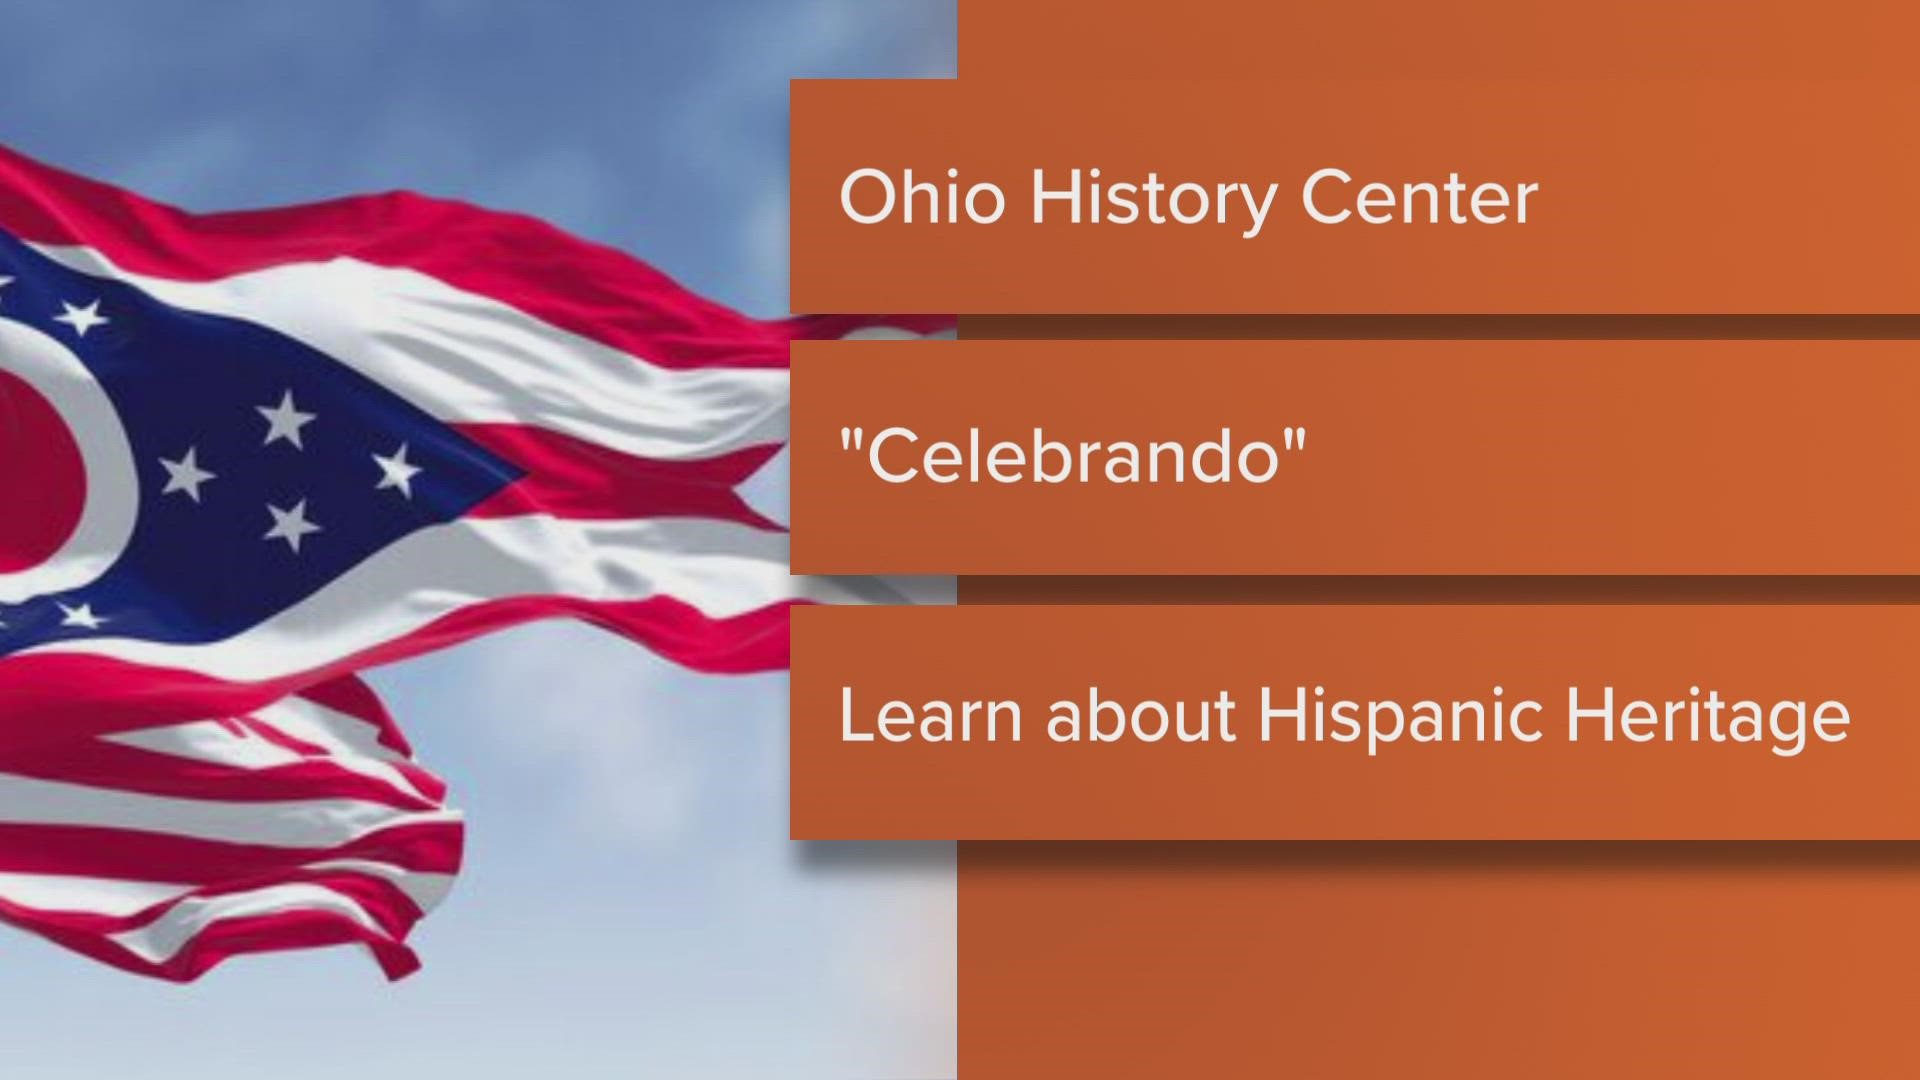 It's a chance to learn and talk about Hispanic and Latin heritage from the perspectives of Ohioans.